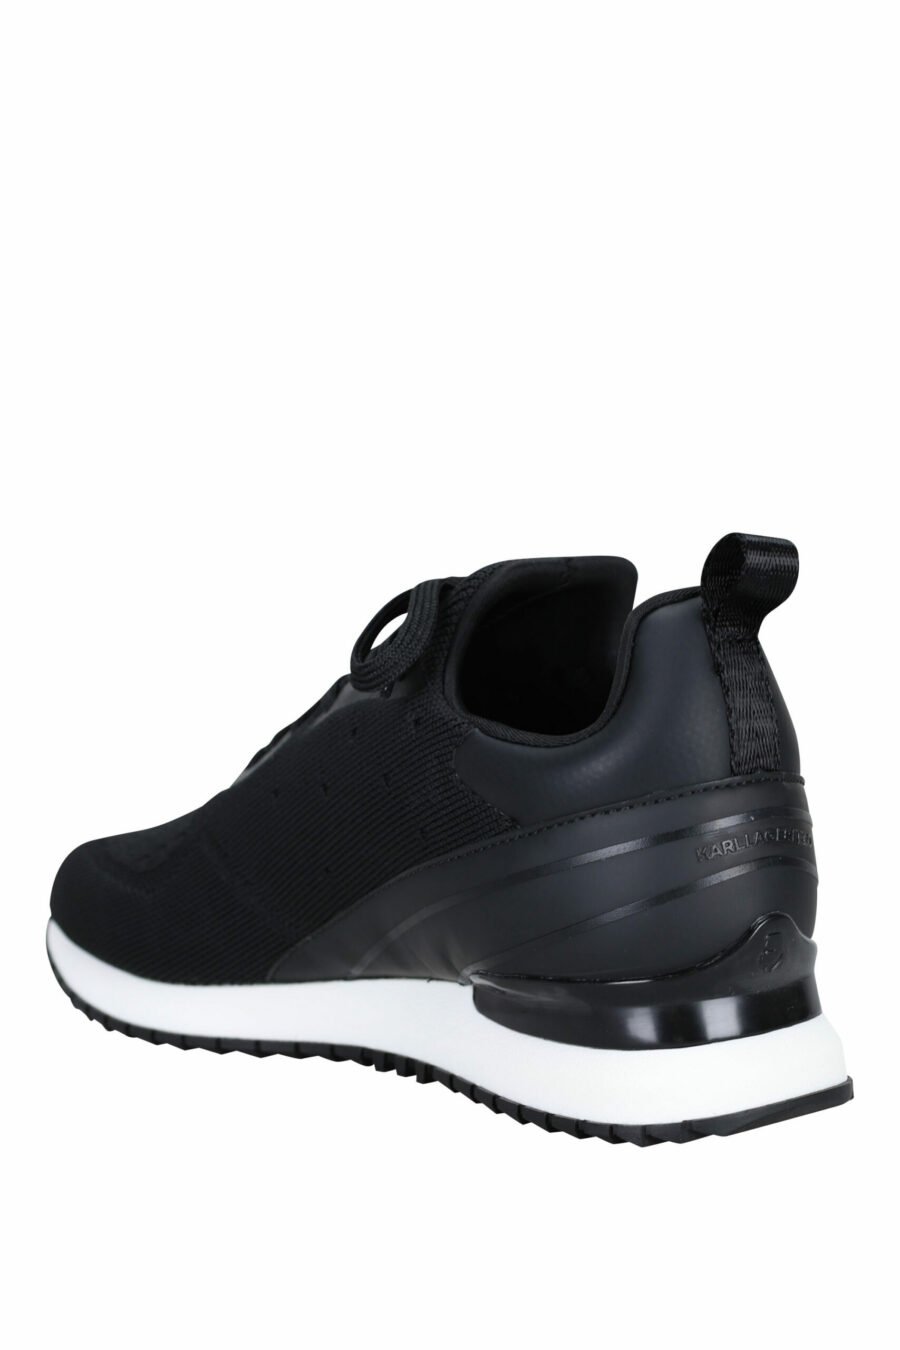 Black "velocitor" shoes with white "rue st guillaume" logo - 5059529326370 3 scaled